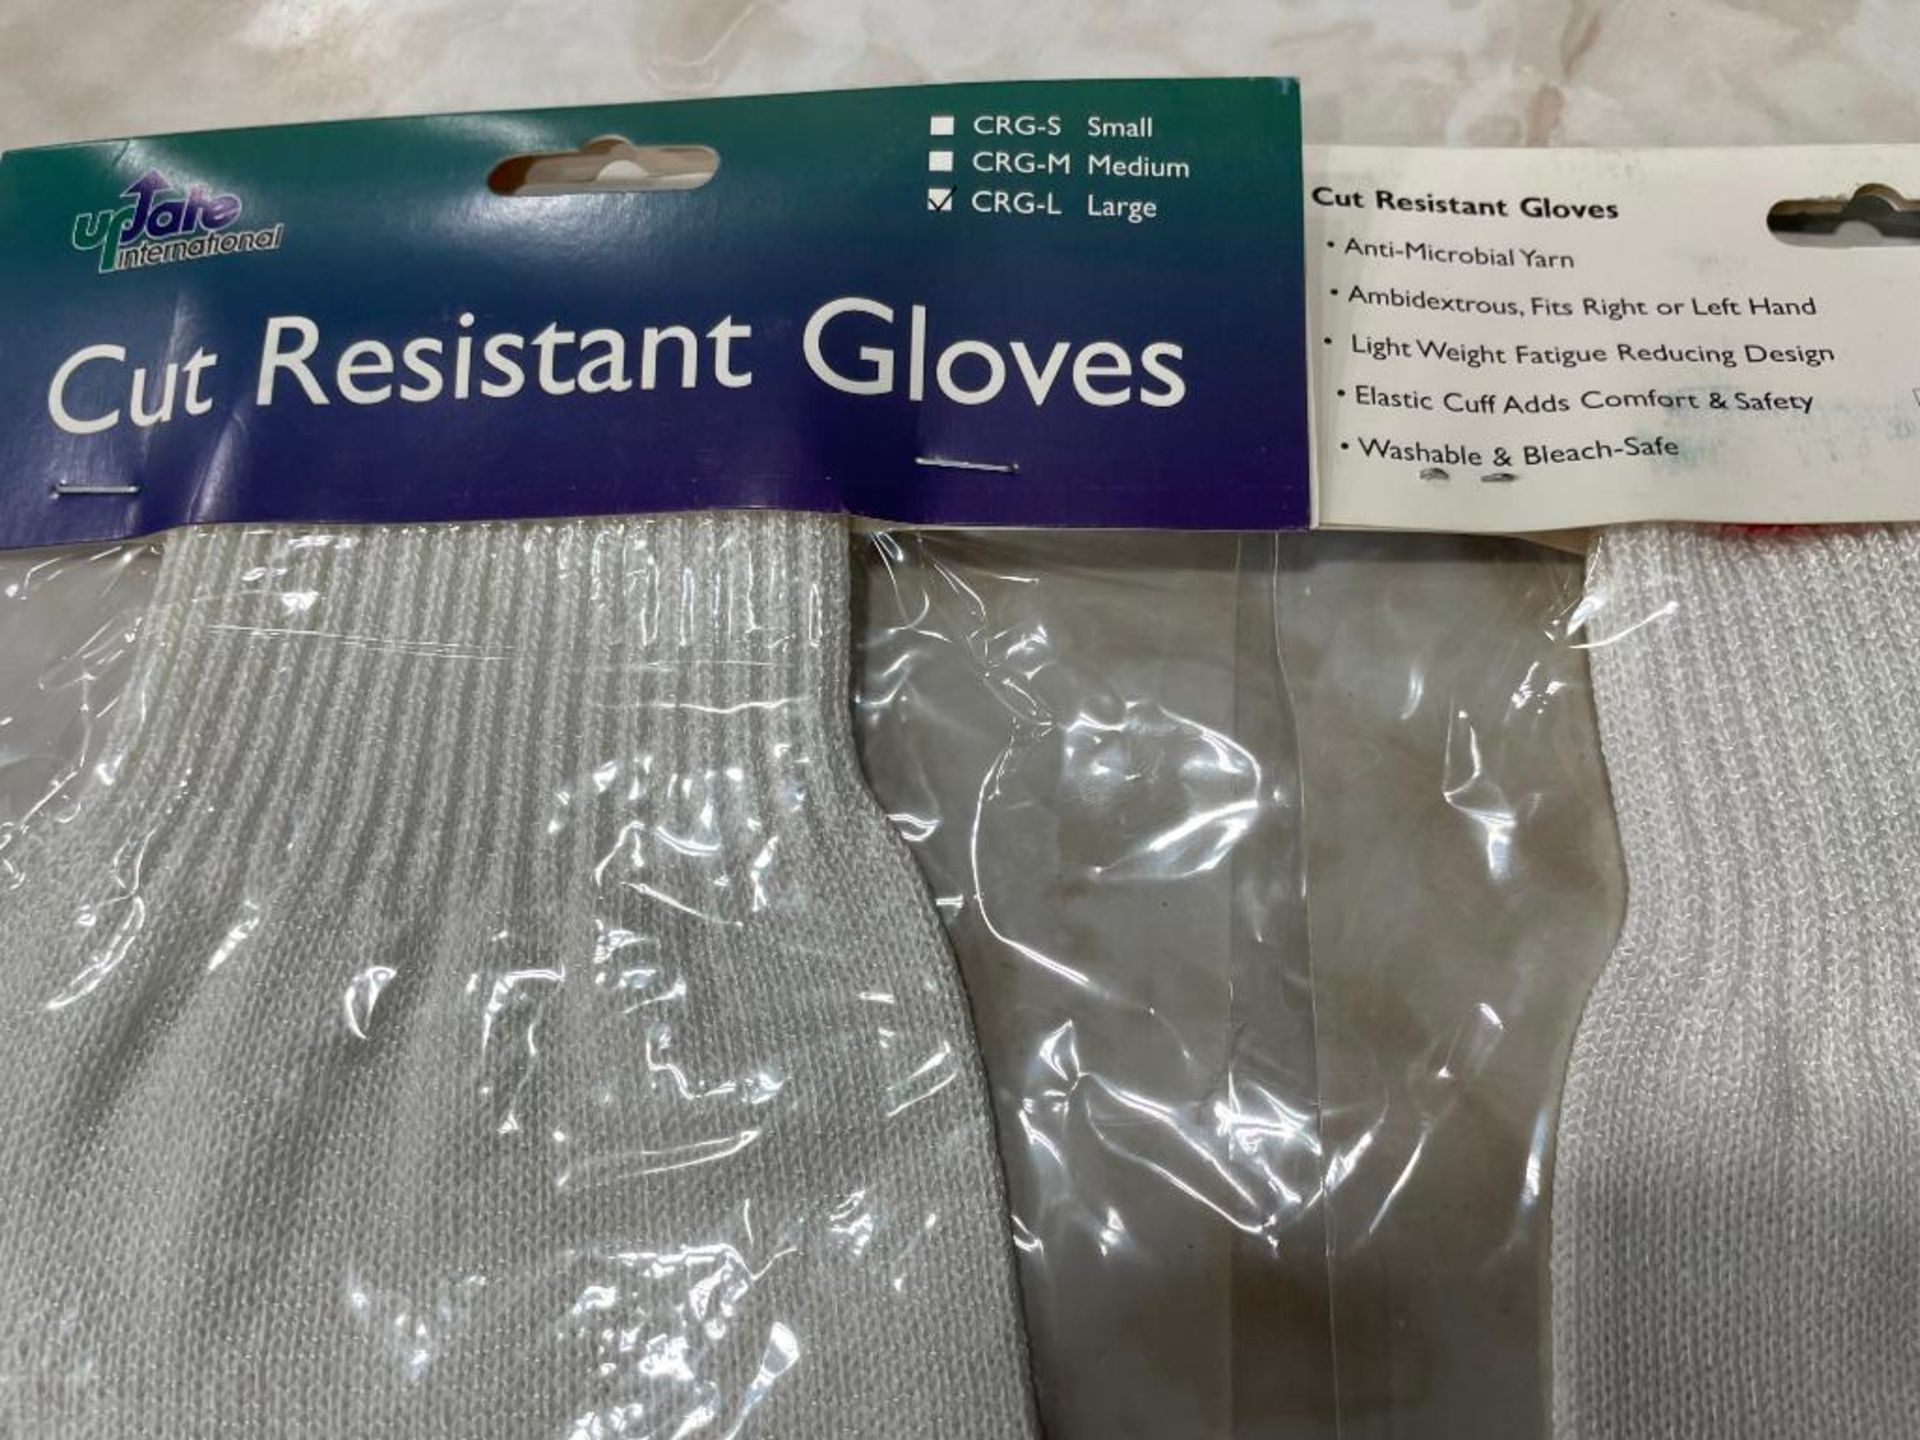 LOT OF (2) UPDATE CUT RESISTANT GLOVES - LARGE - Image 3 of 4